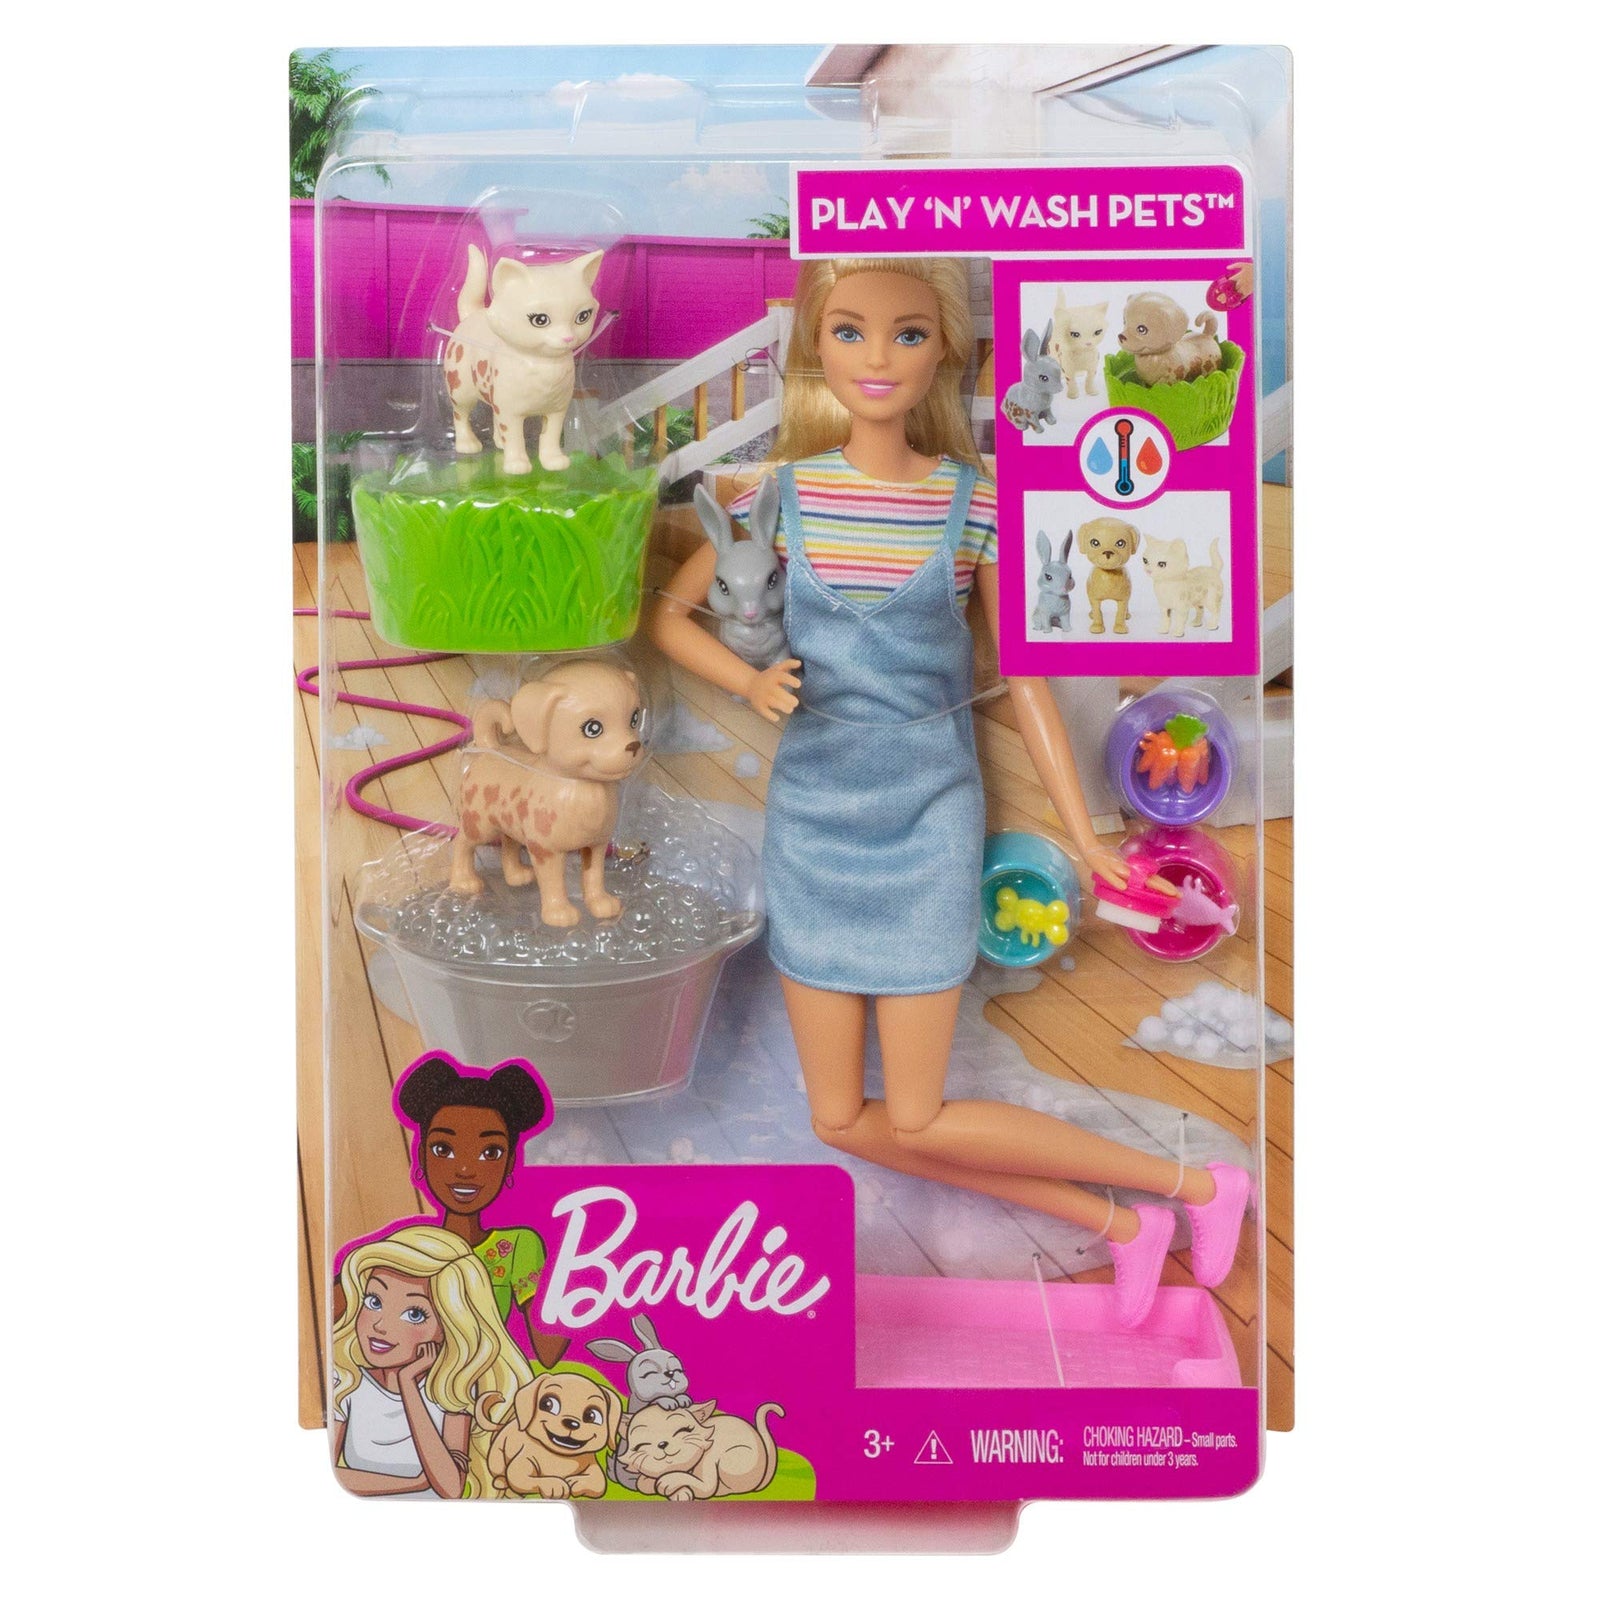 Barbie Play ‘n’ Wash Pets Playset with Blonde Doll, 3 Color-Change Animals a Puppy, Kitten and Bunny and 10 Pet and Grooming Accessories, Gift for 3 to 7 Year Olds